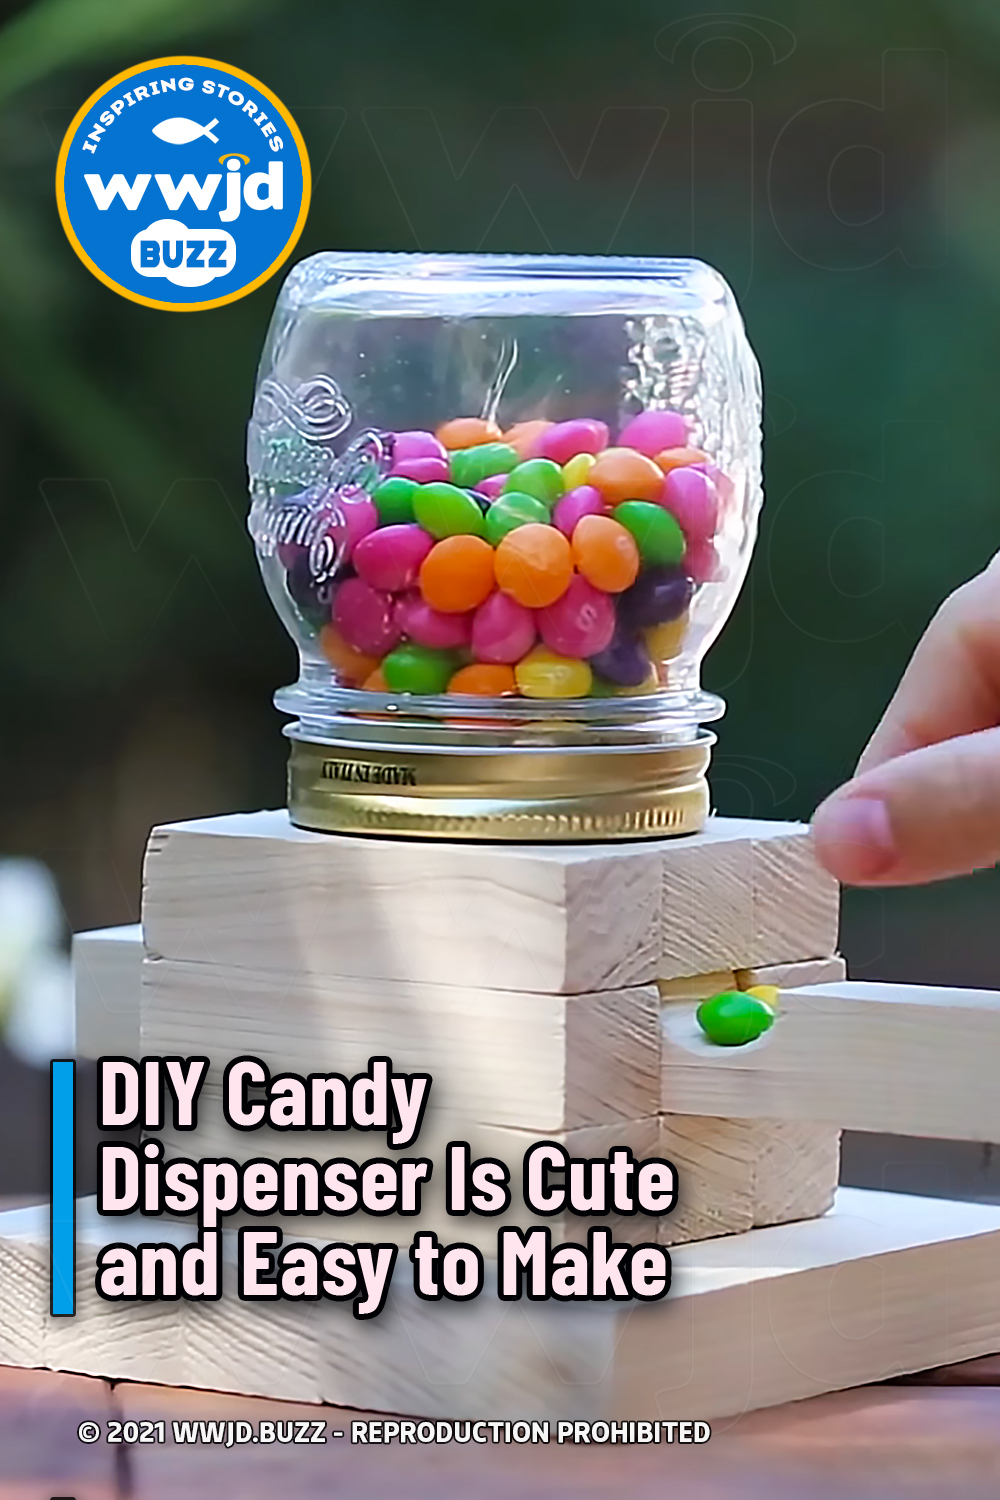 DIY Candy Dispenser Is Cute and Easy to Make